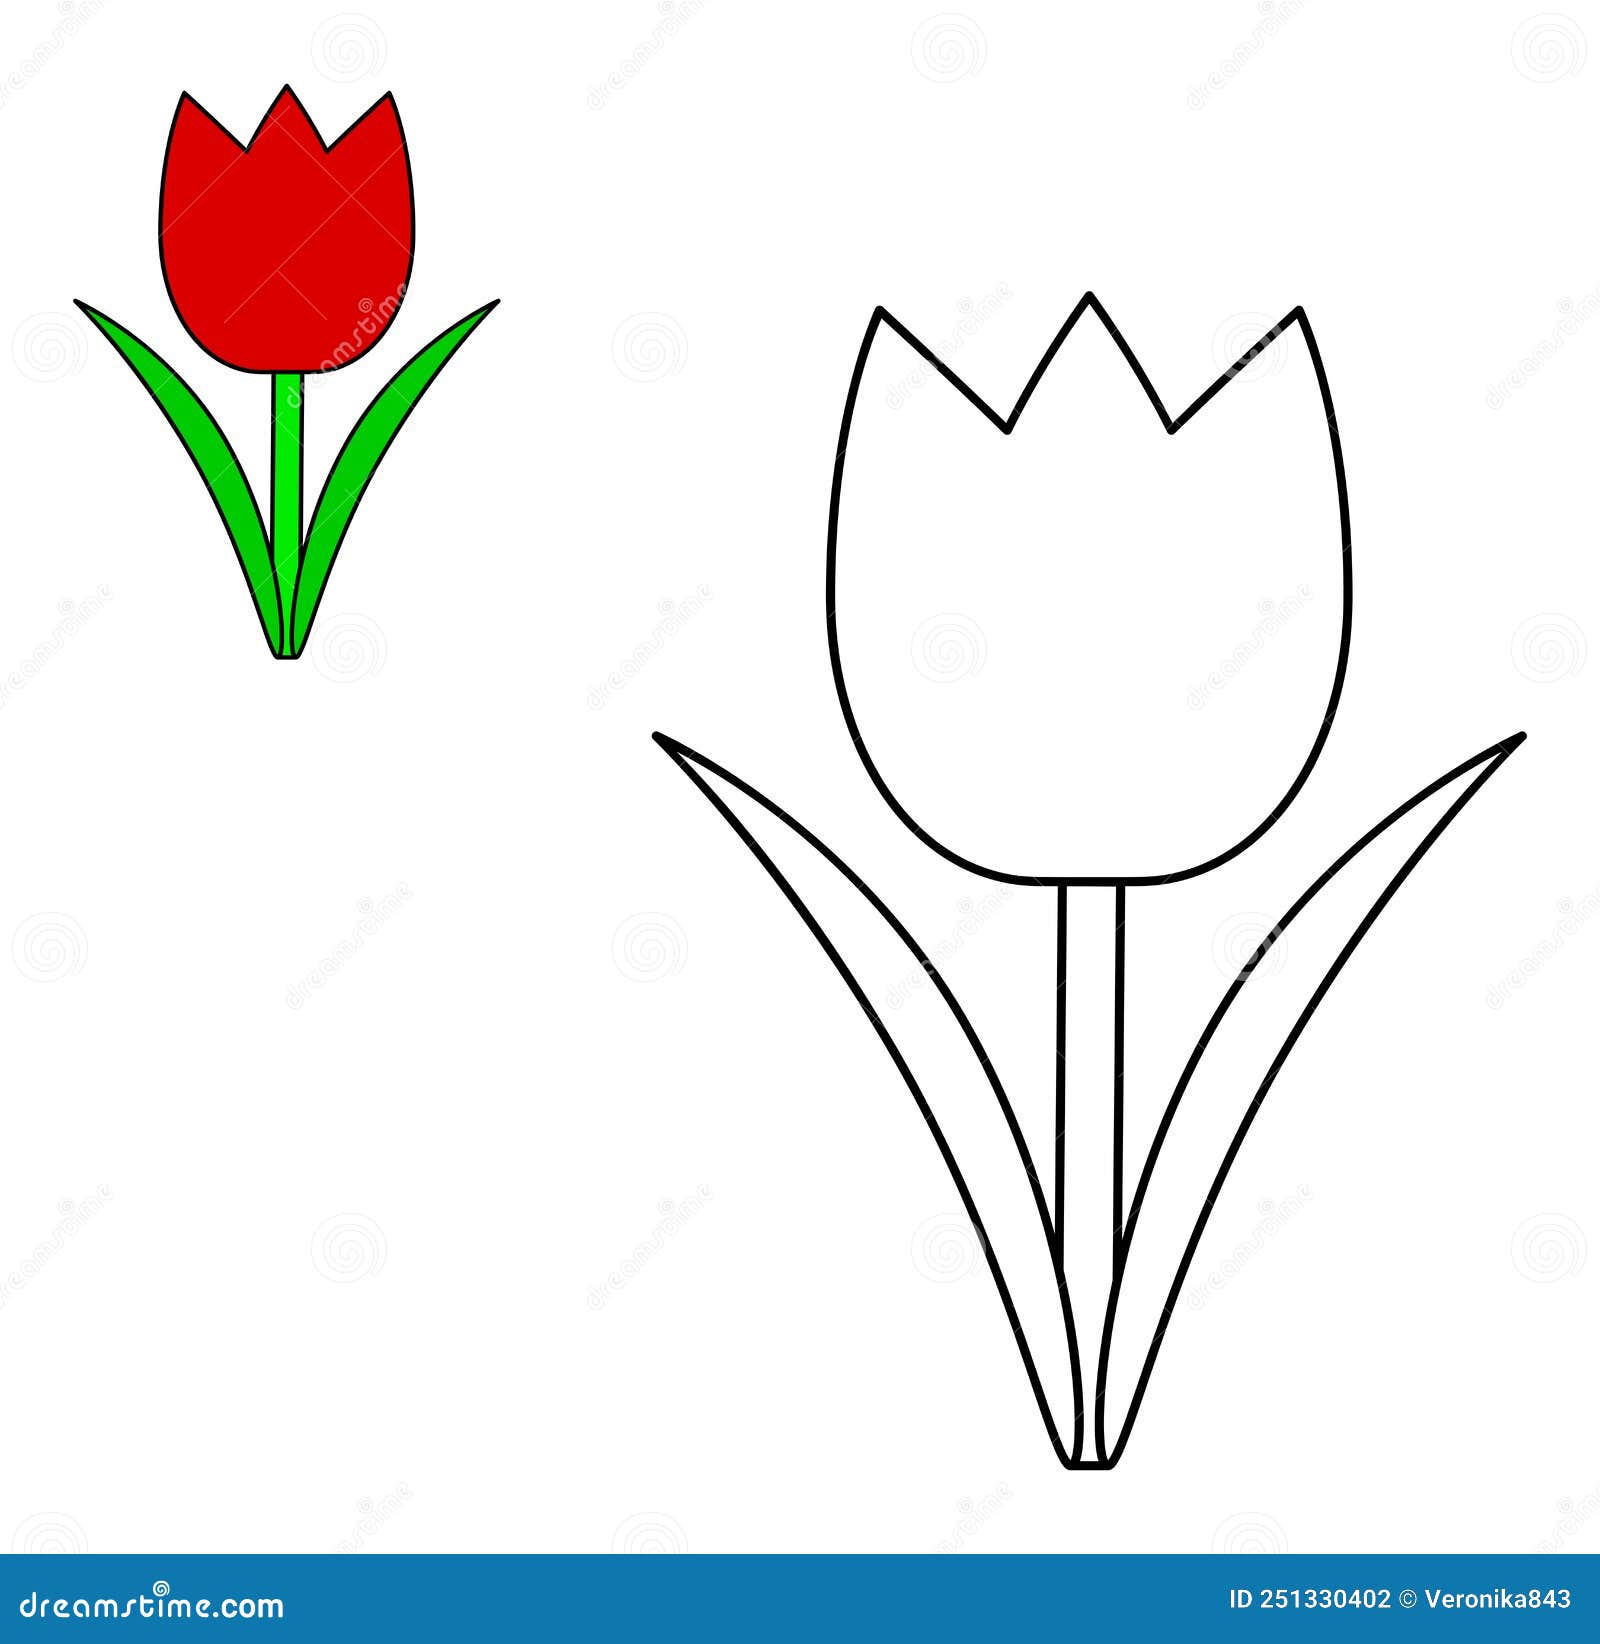 Red tulip colorful and black and white flower coloring book page for children stock vector